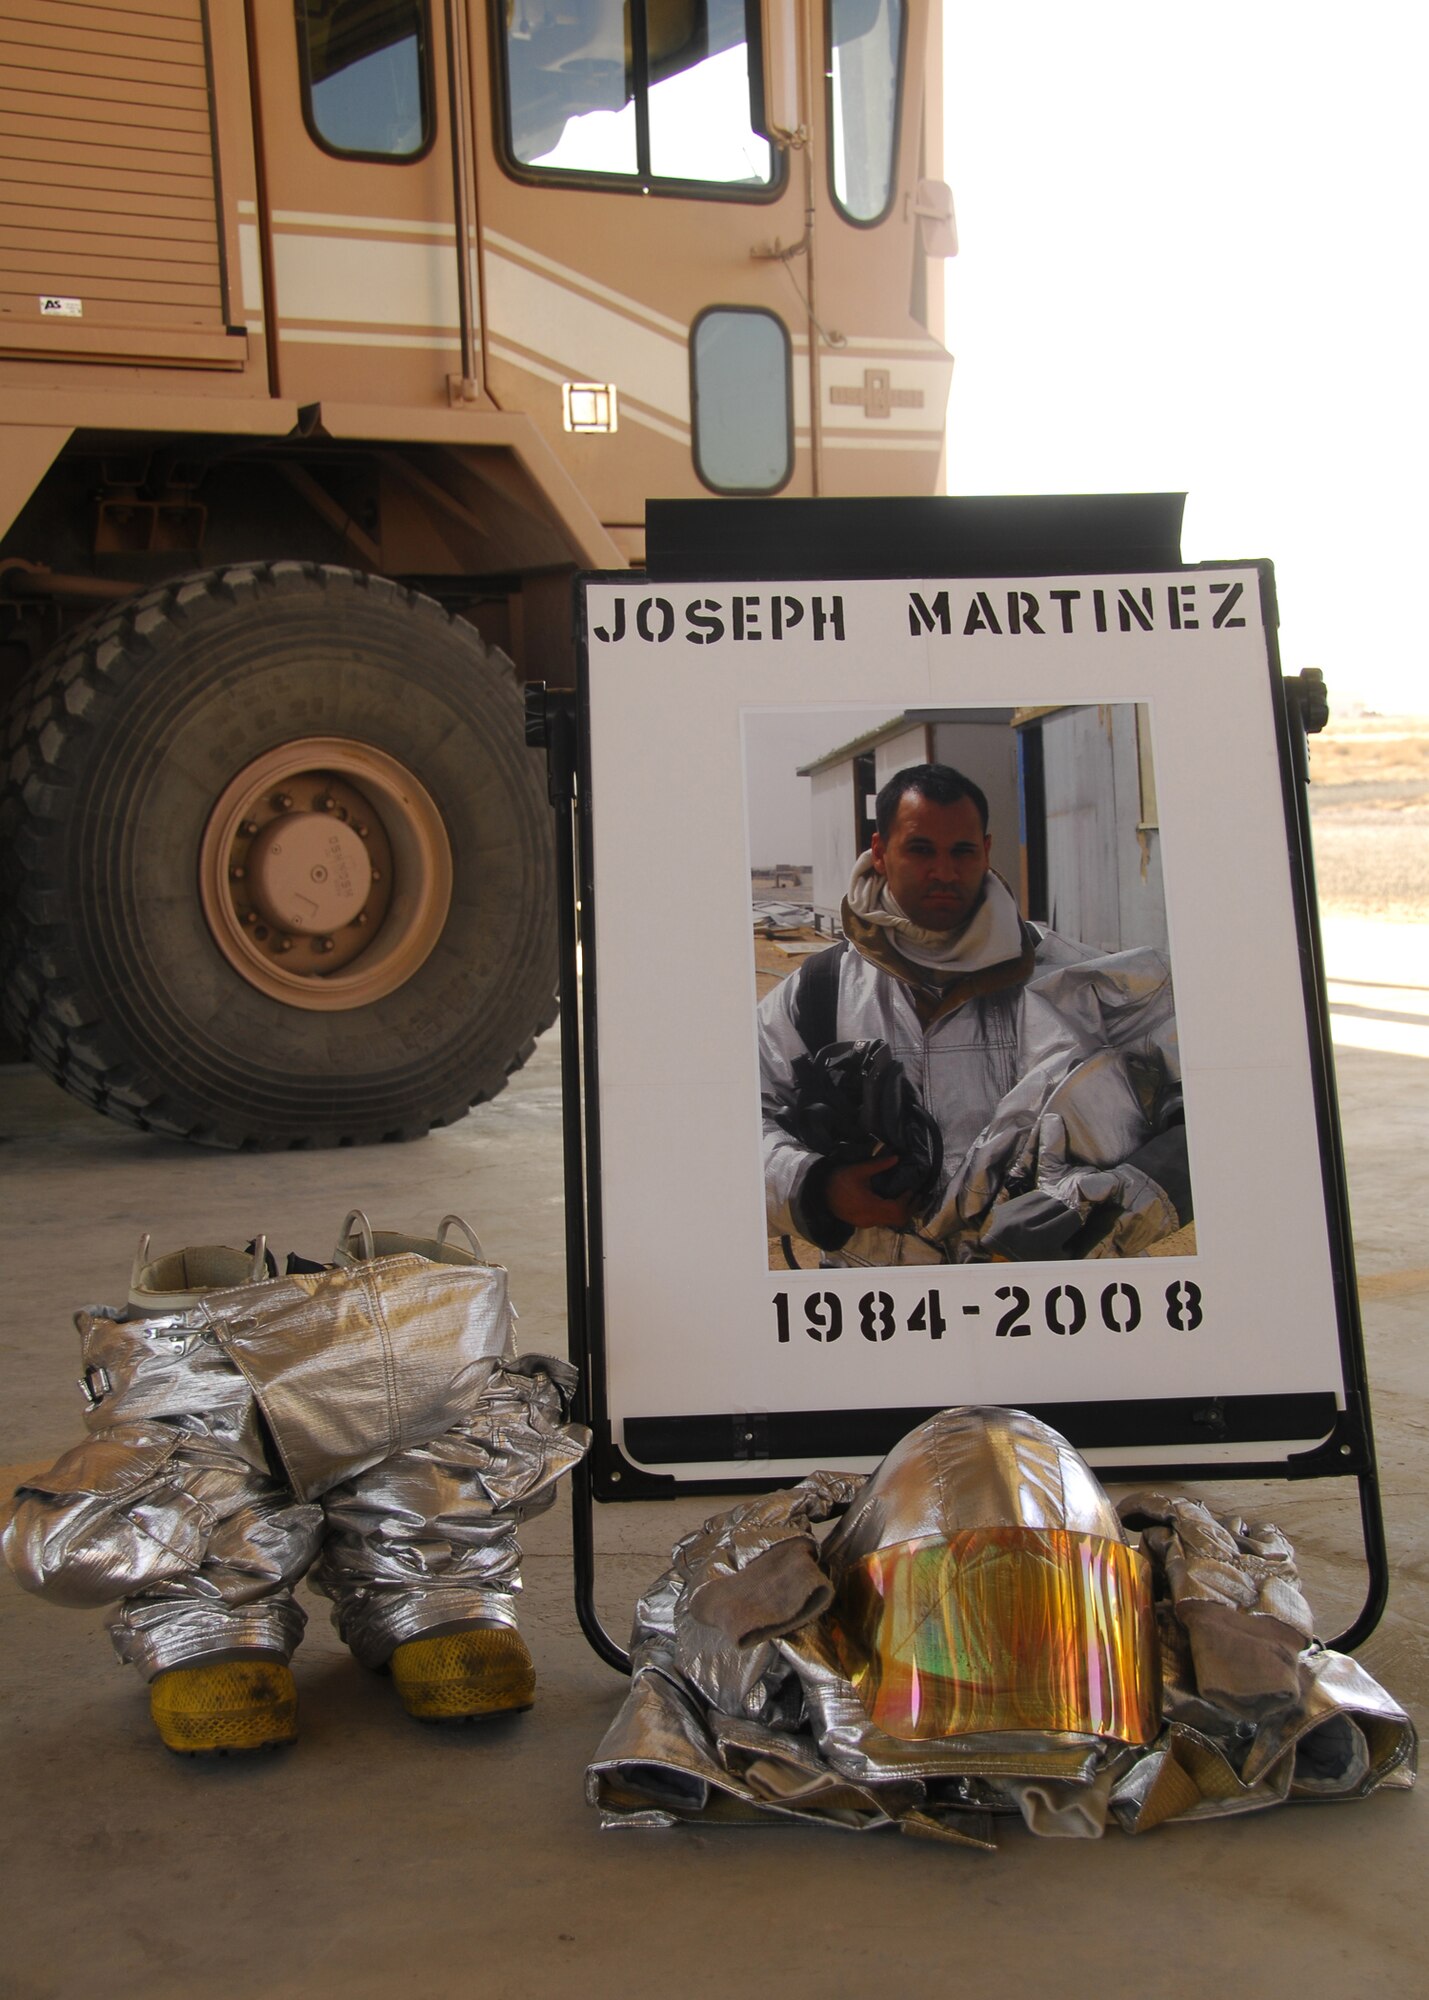 SOUTHWEST ASIA -- A photo of firefighter Senior Airman Joseph Martinez, who was killed in a non-combat related injury on Nov. 29, on display during a memorial service at an air base in Southwest Asia. The firefighters deployed to the 386th Expeditionary Civil Engineer Squadron held a memorial service for Airman Martinez, a firefighter from the 156th Airlift Wing, Puerto Rico Air National Guard, who was killed in a non-combated related injury. He was deployed to the 386th Expeditionary Civil Engineer Squadron from April through September 2008. (U.S. Air Force photo/Tech. Sgt. Raheem Moore)